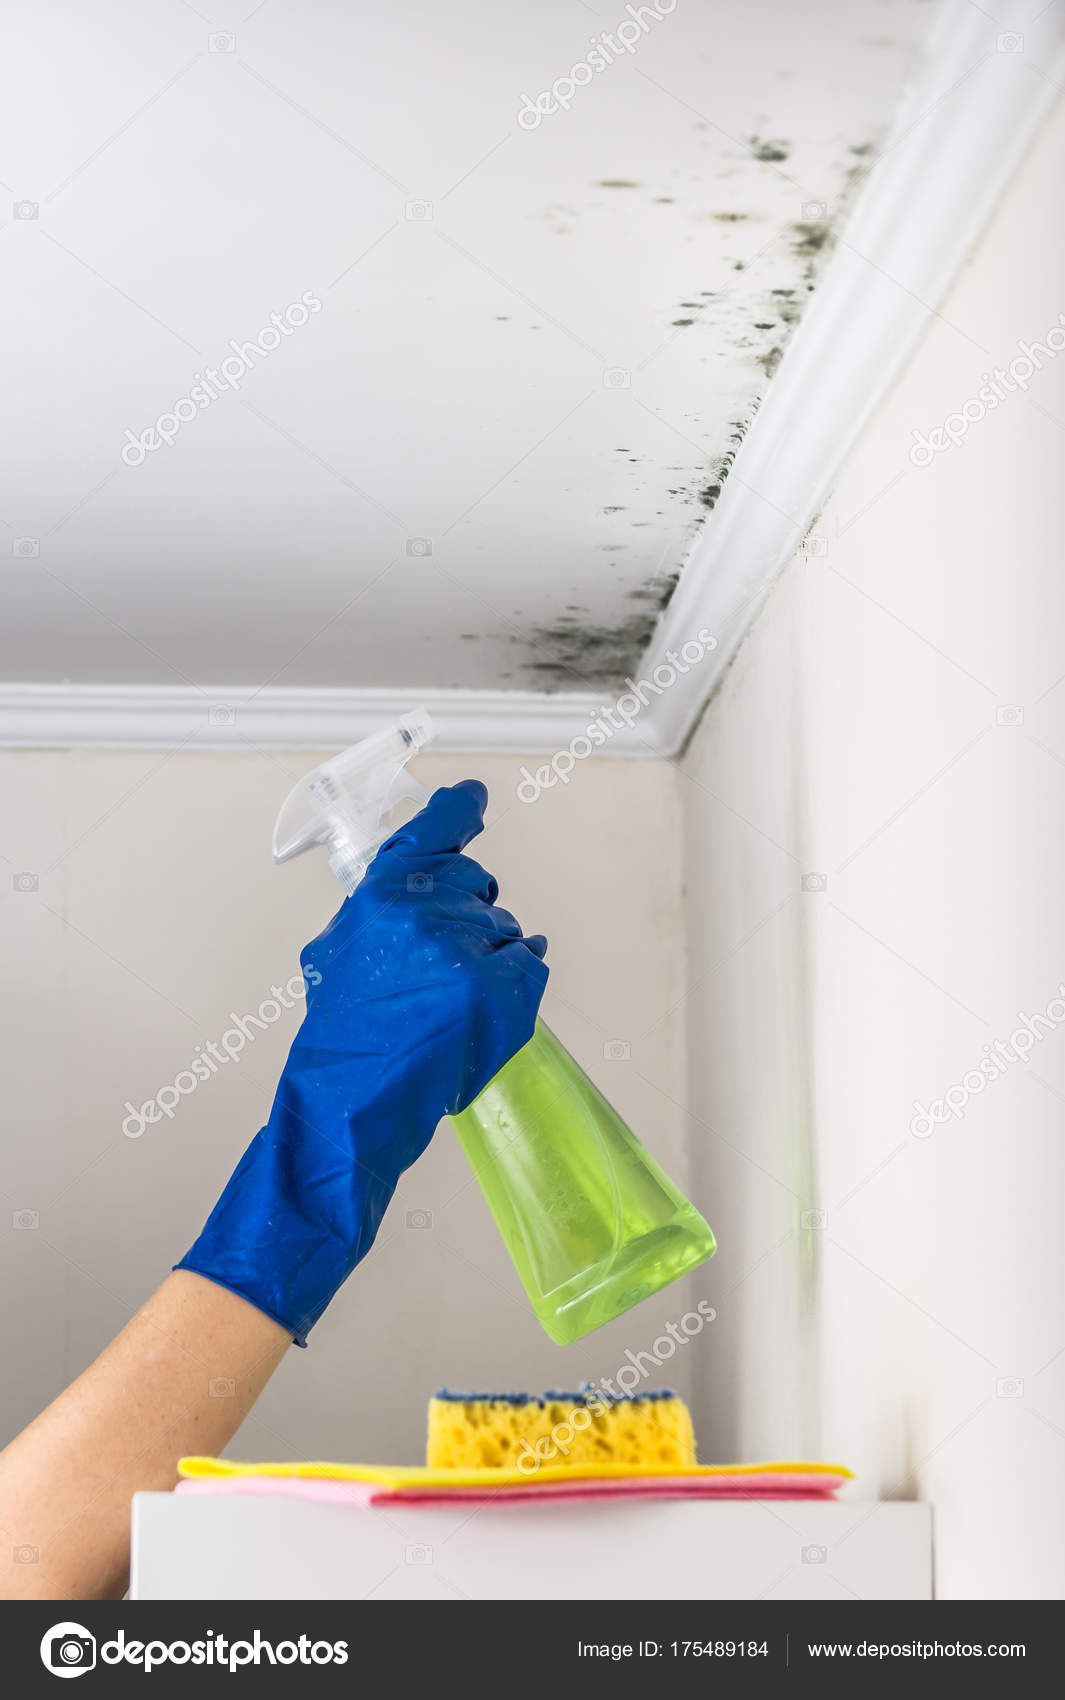 Removing Mold From The Living Accommodation With Cleaning